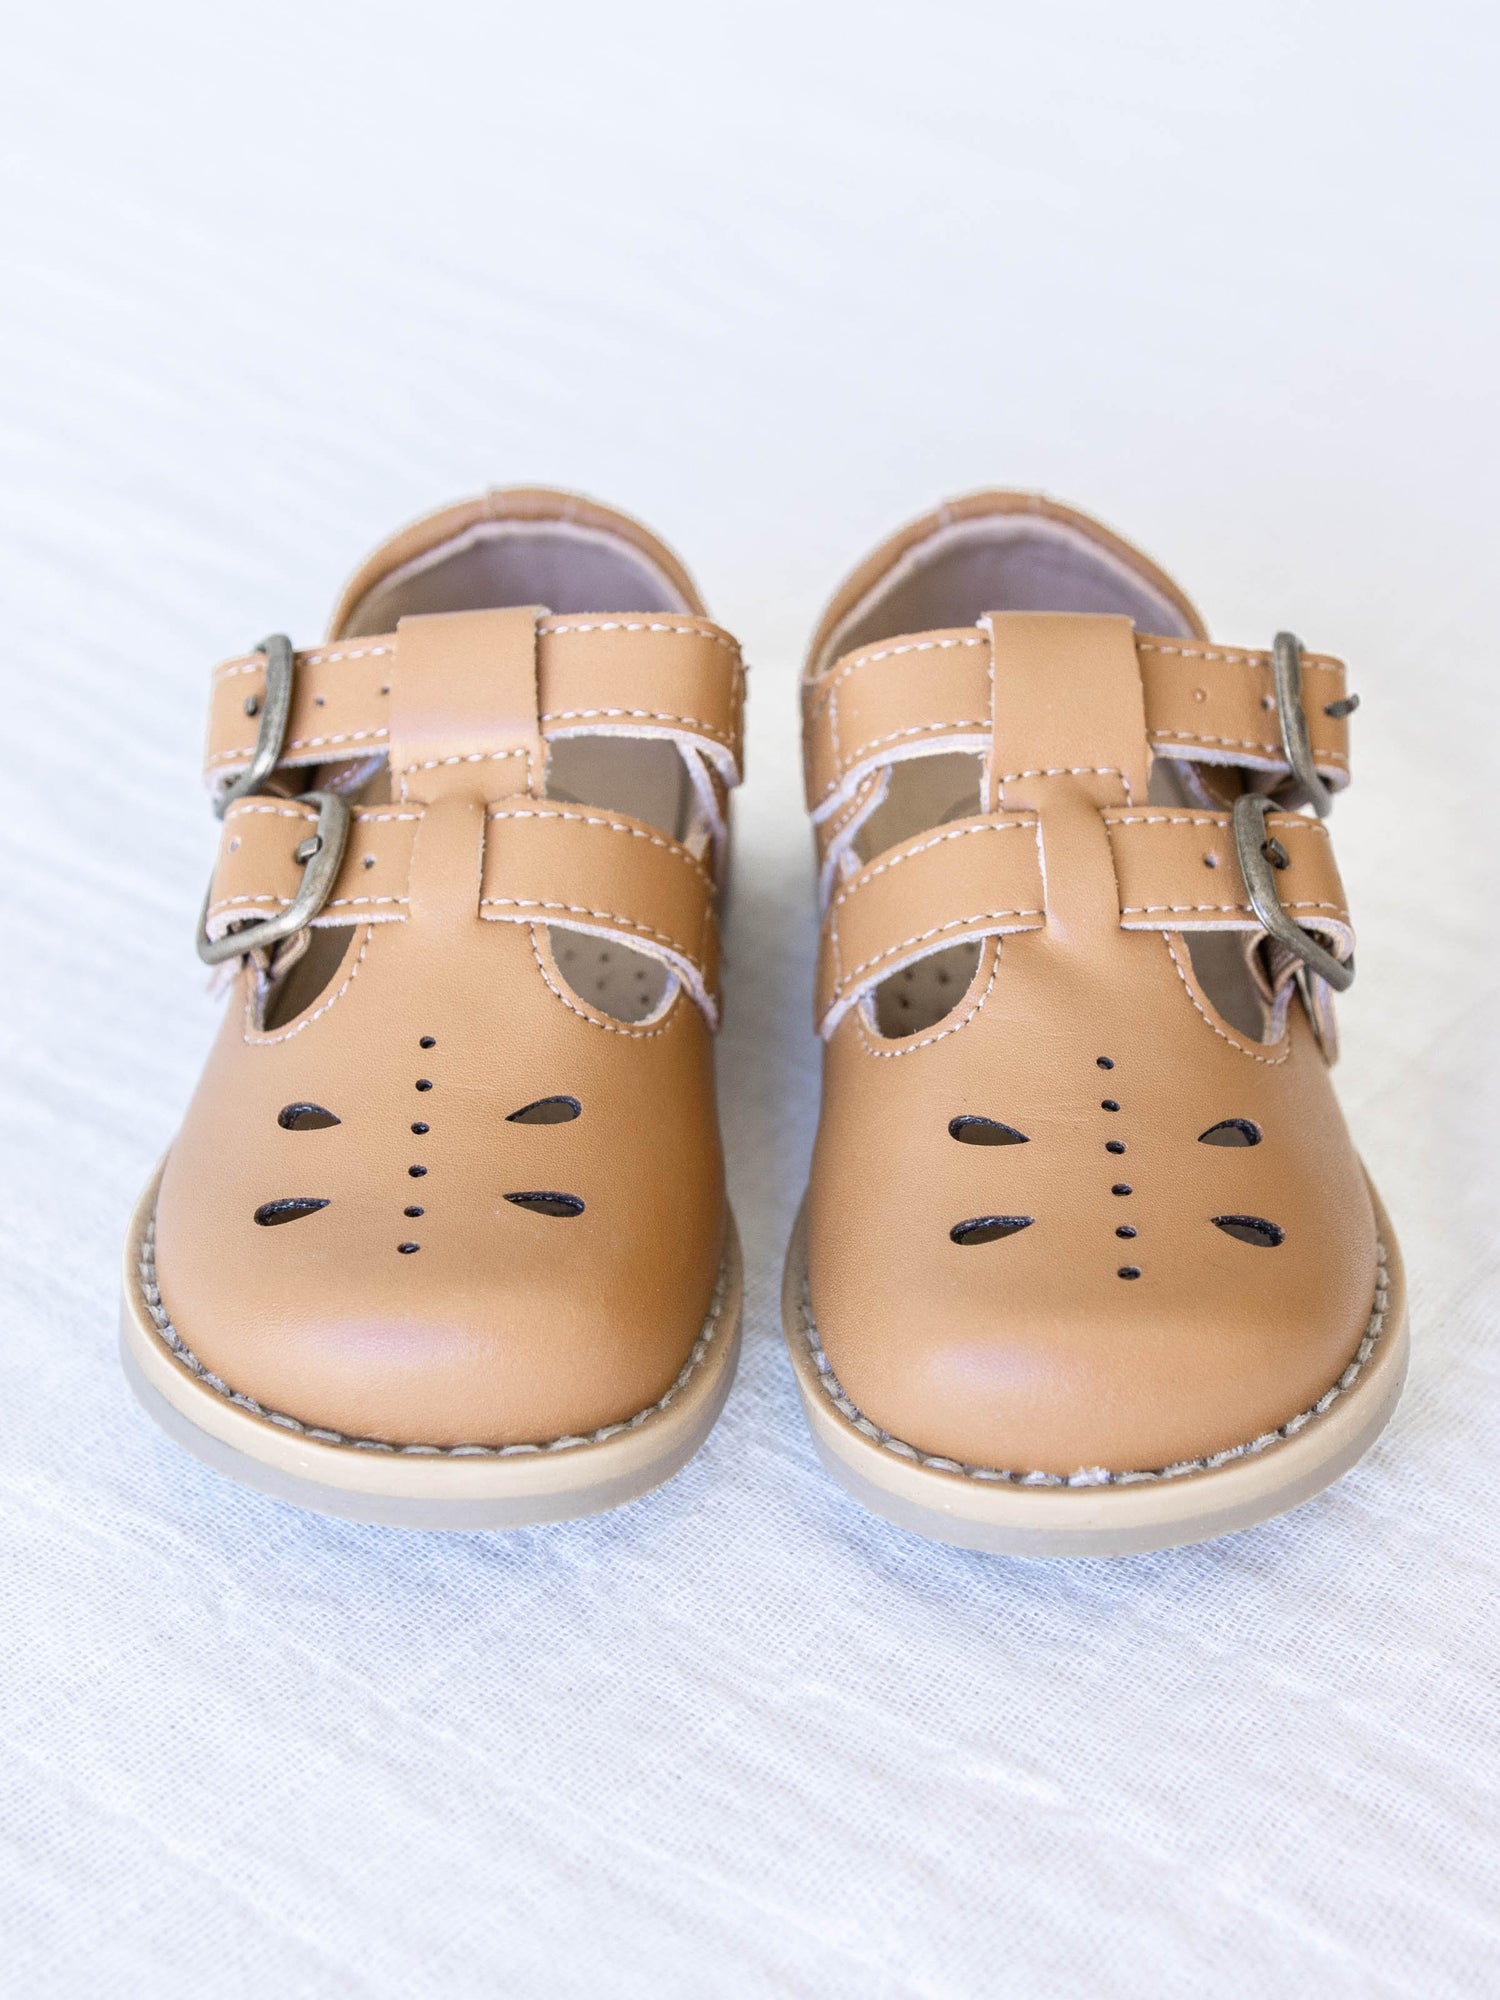 A pair of tan colored genuine leather rubber soled shoes with two adjustable metal buckles and cut out detail across the toe area in a dragonfly type pattern. 